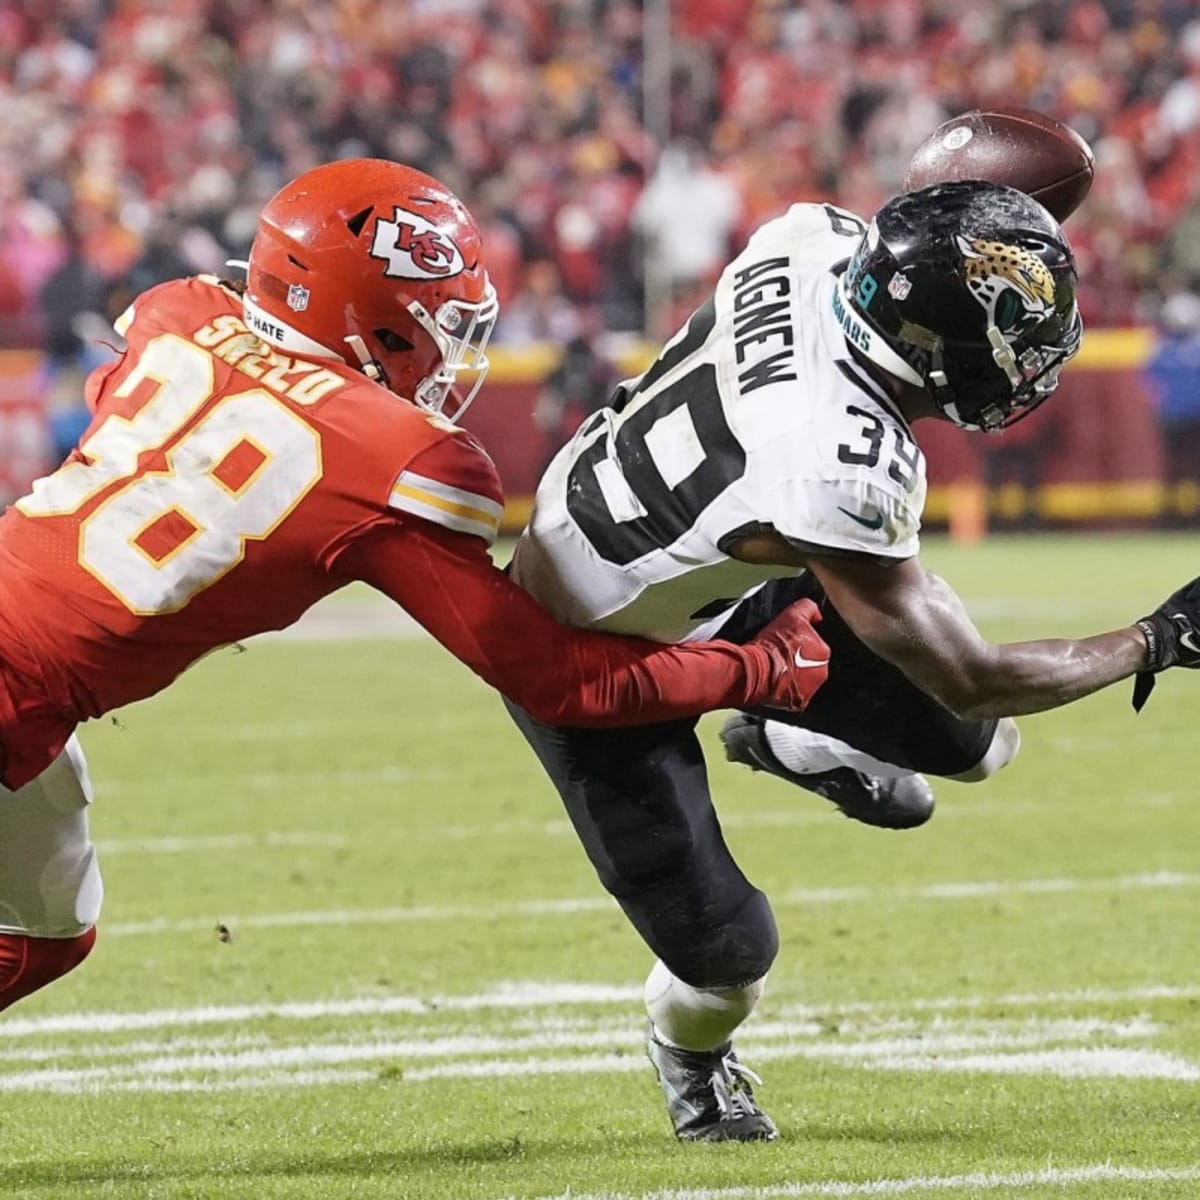 What channel is Kansas City Chiefs game today vs. Jaguars? (1/21